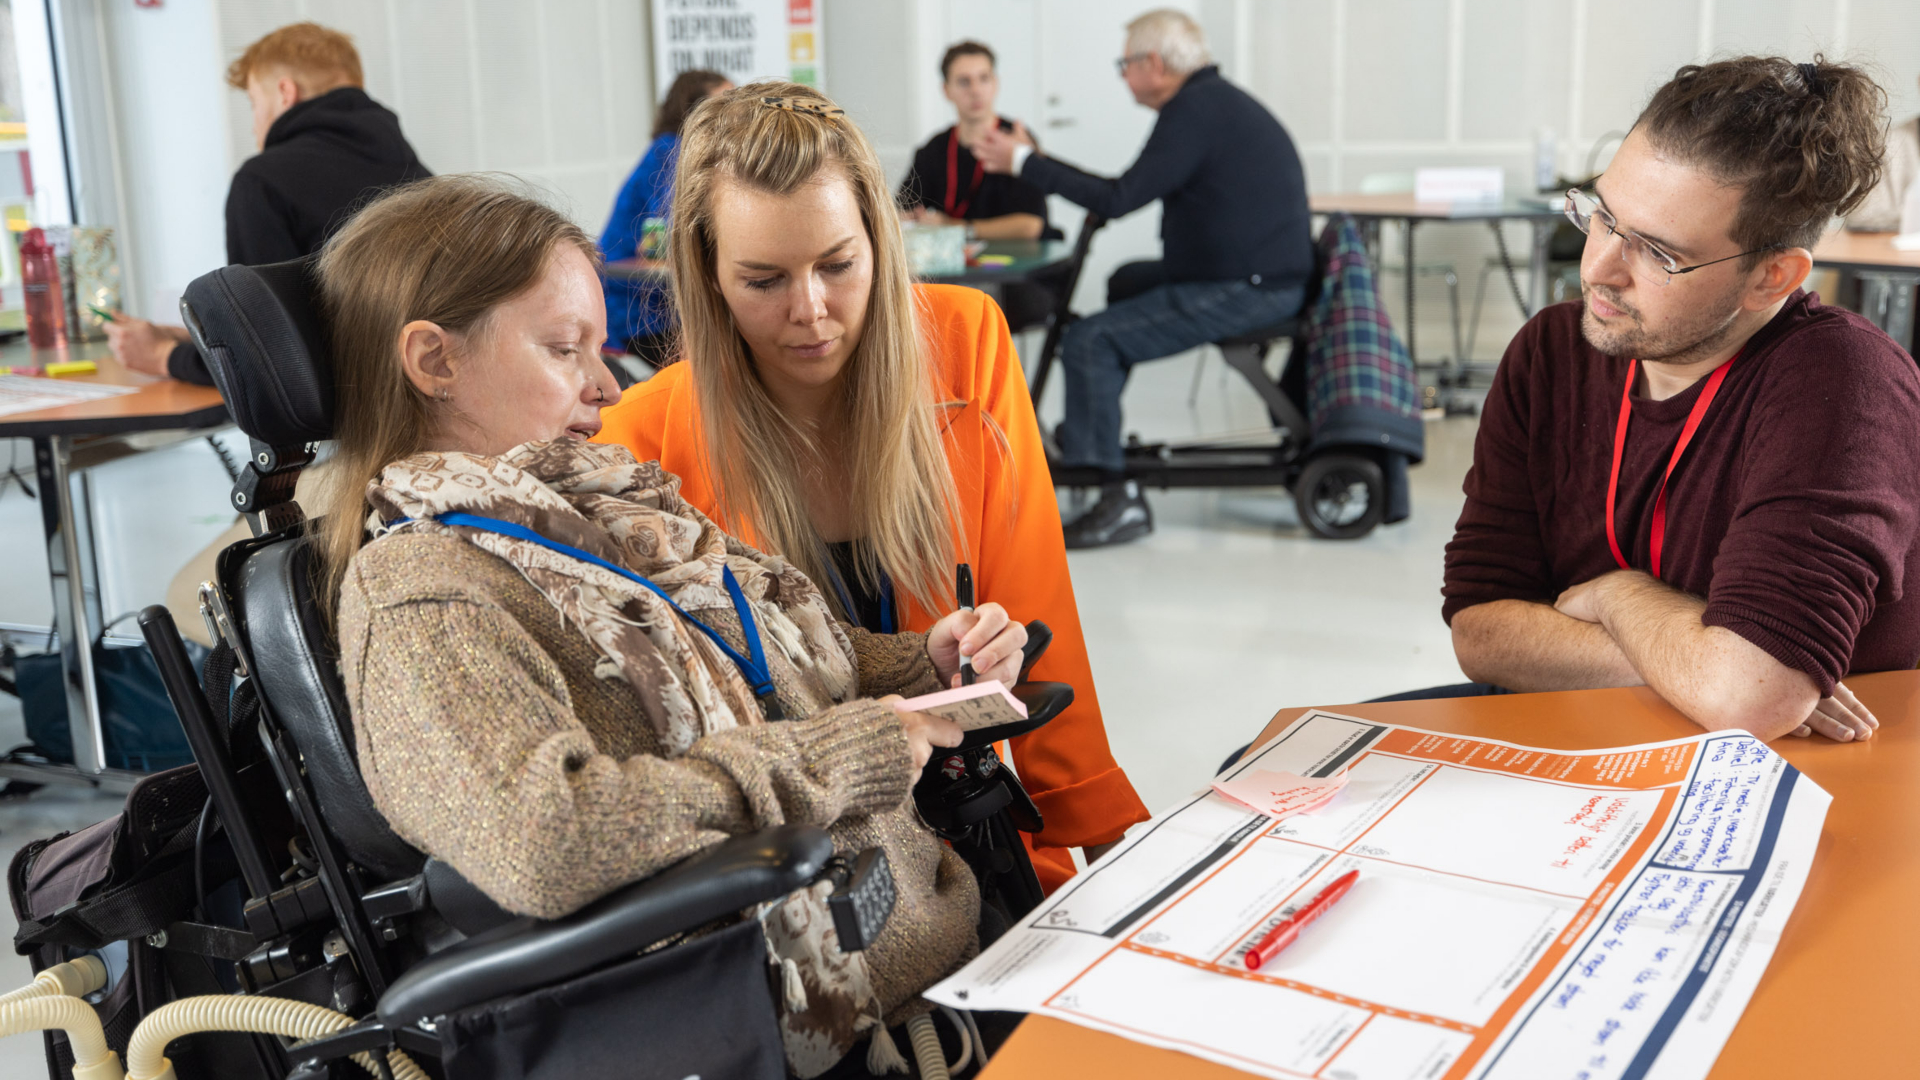 Entrepreneurs with disabilities and DTU students develop inclusive solutions to specific problems that the entrepreneurs have in their everyday lives. Photo: Mikal Schlosser